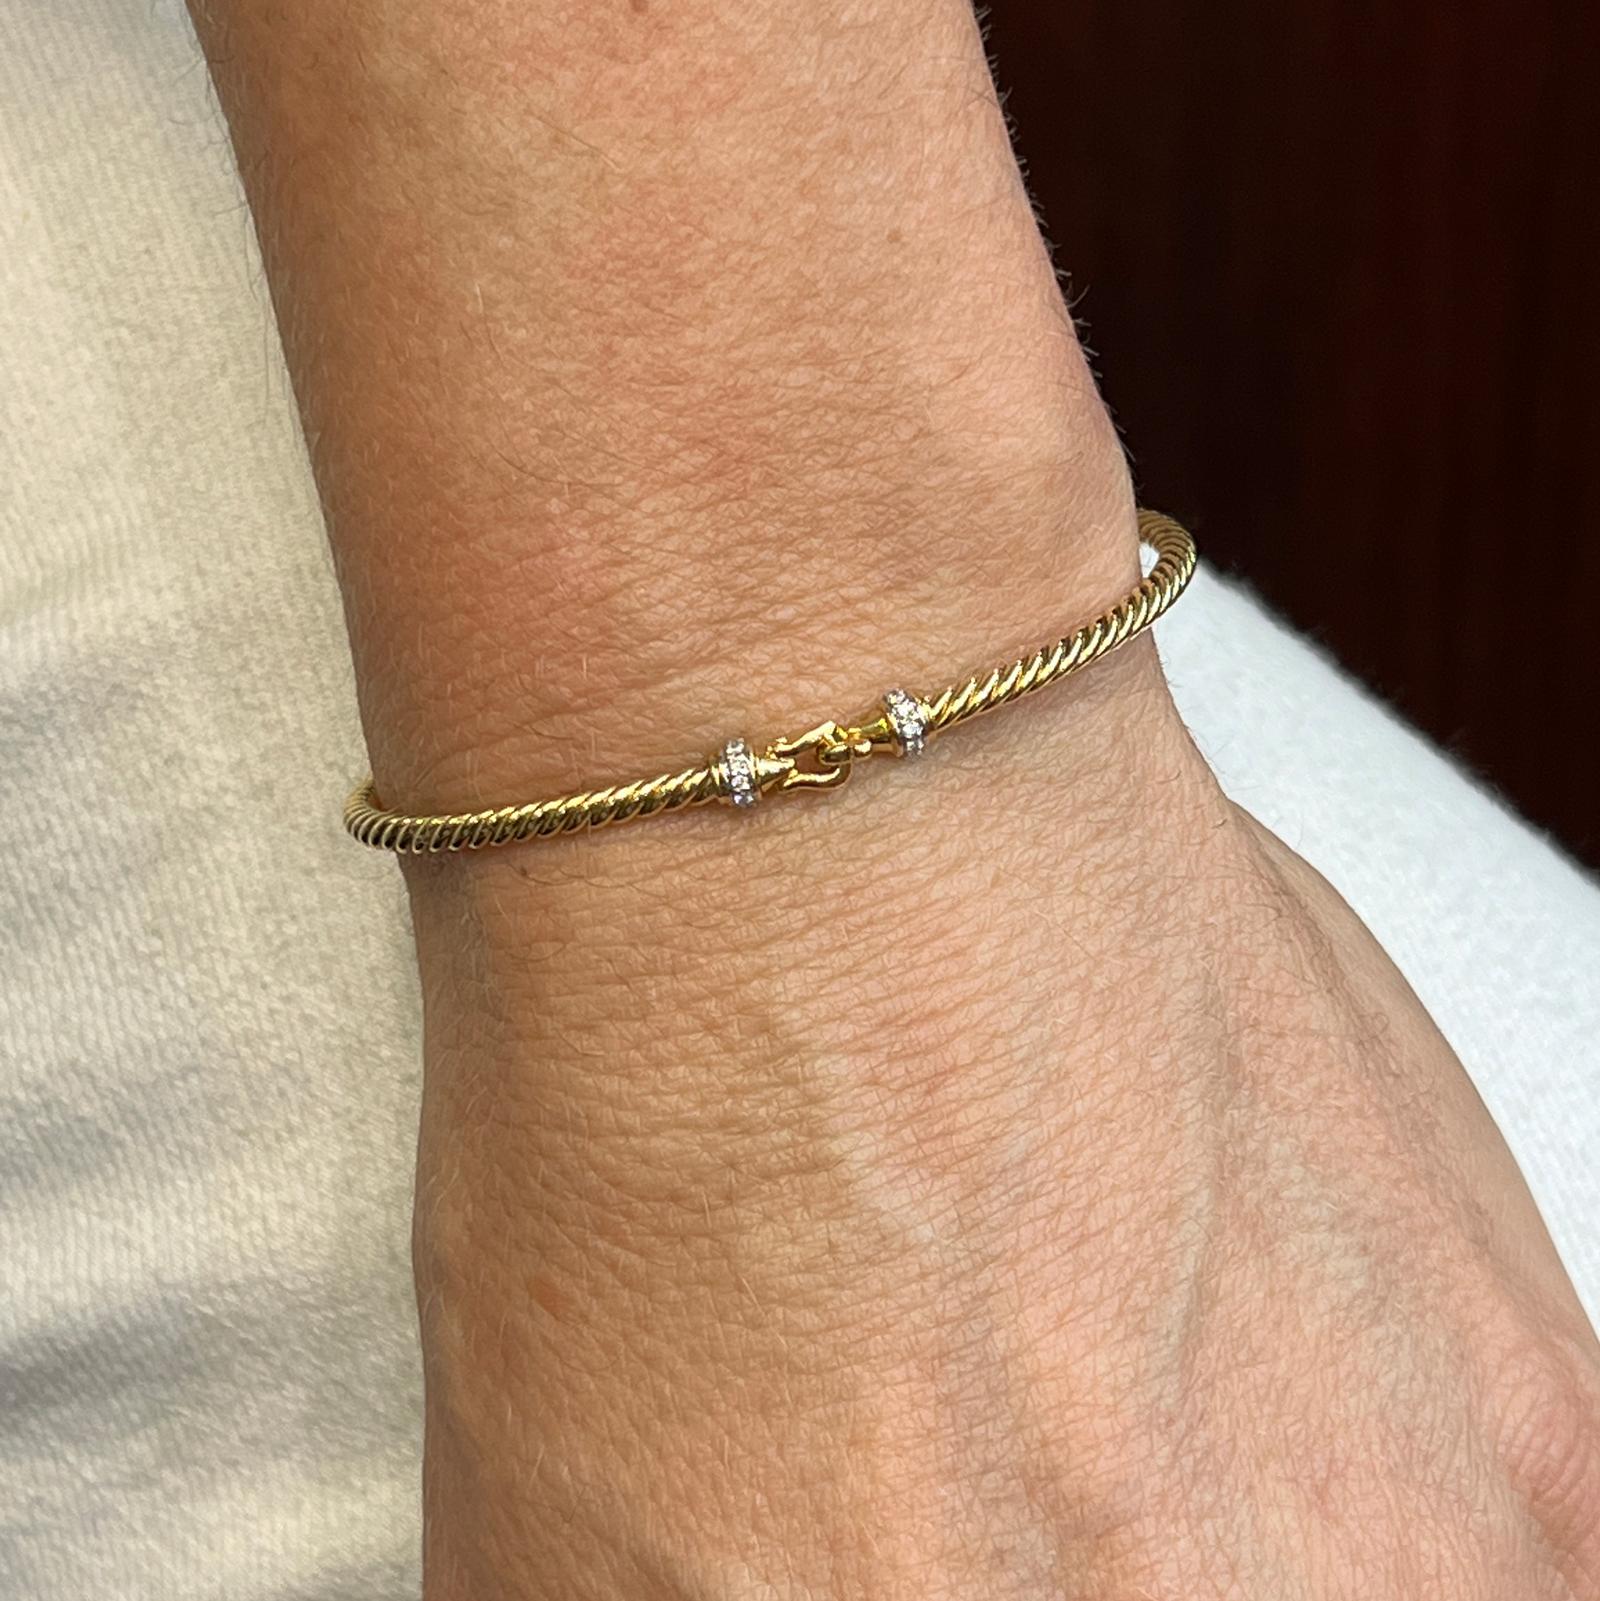 Diamond buckle cable bracelet by designer David Yurman fashioned in 18 karat yellow gold. The cable bangle features round brilliant diamonds weighing approximately .05 CTW on the hook clasp. The bracelet measures 2.6mm in width, 2.25 inches in